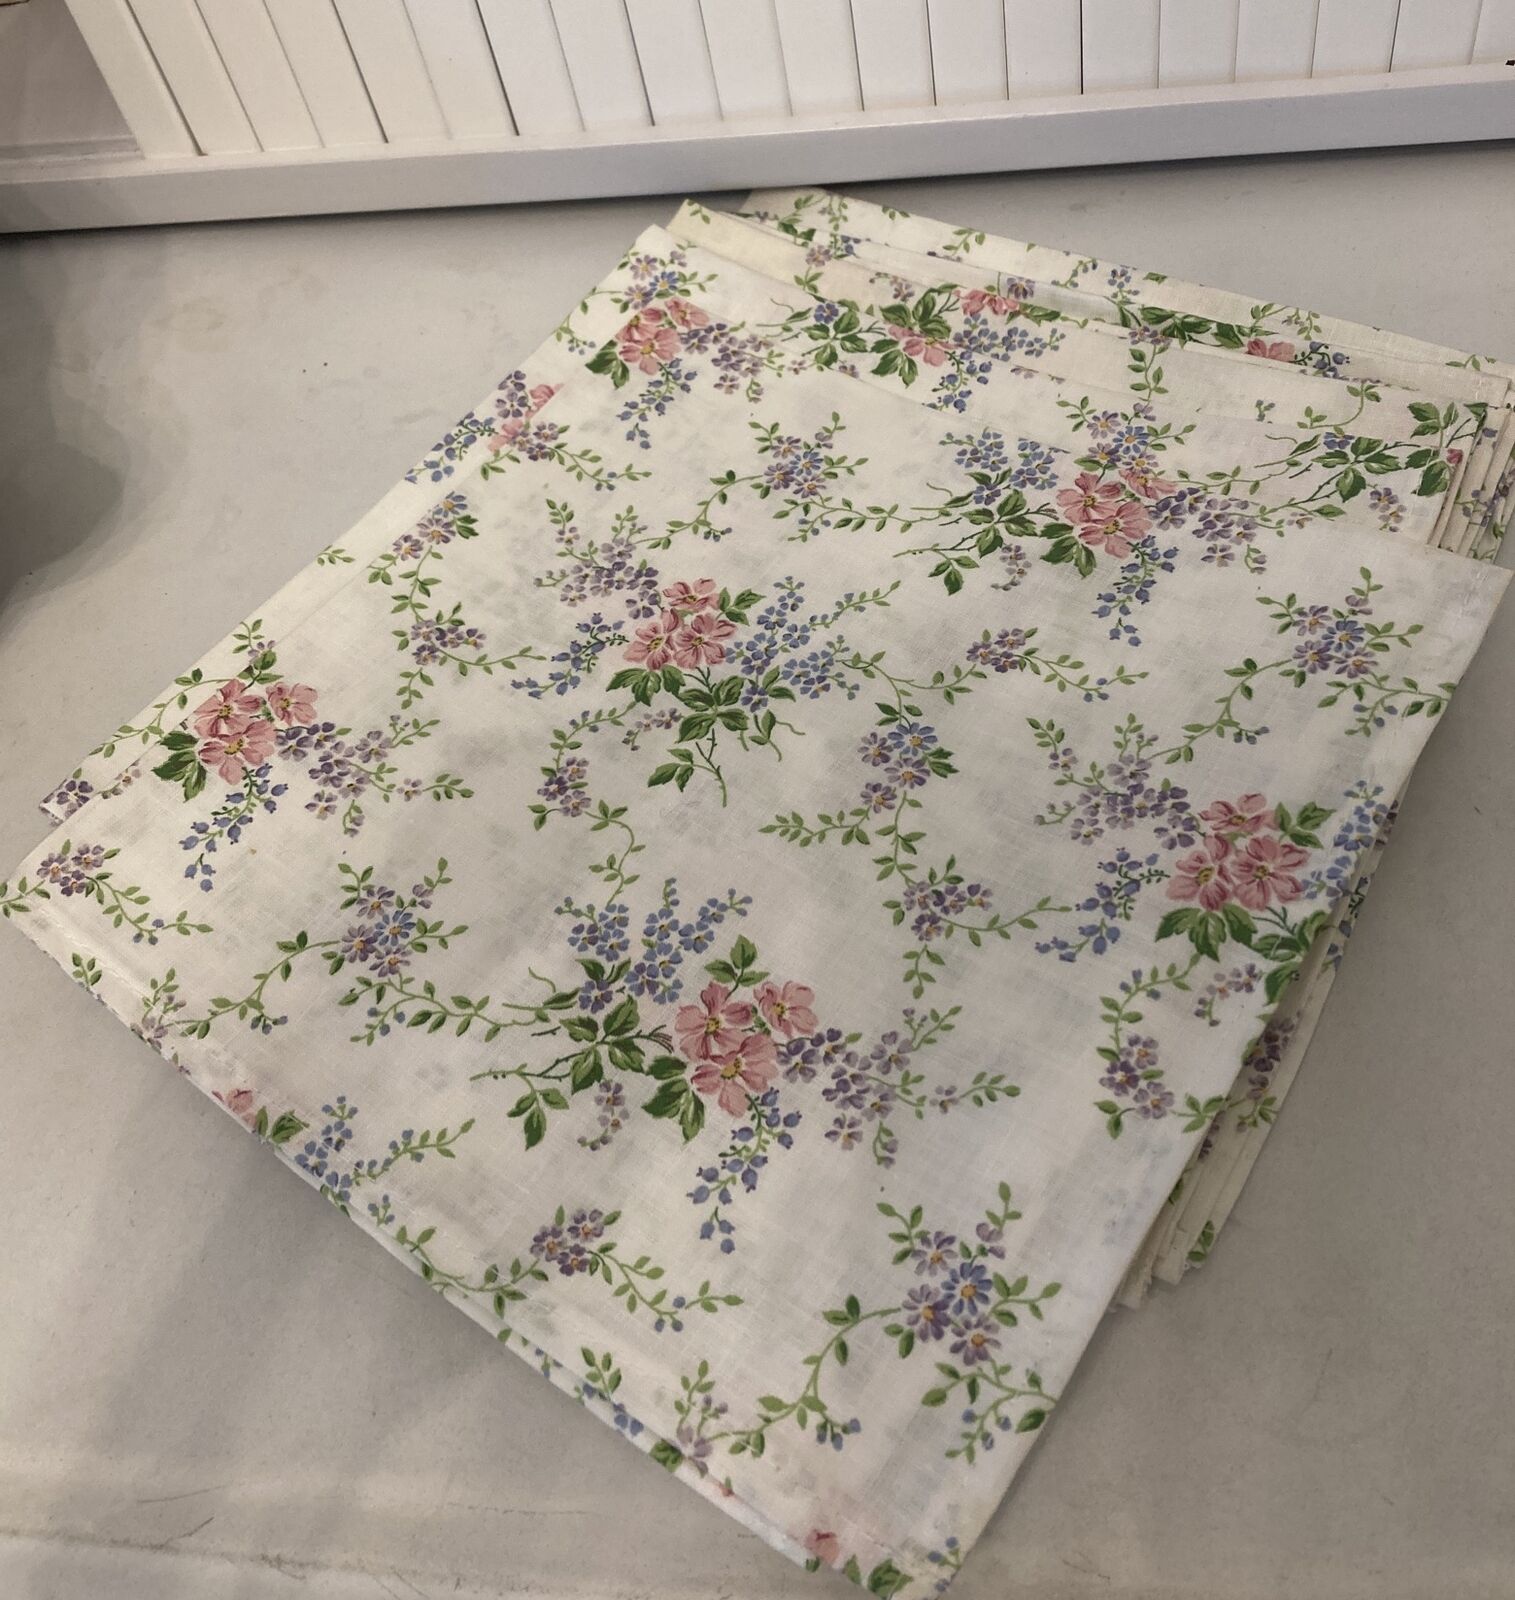 7 French Country Floral Cotton Napkins White Pink Green Floral 16”x 16”